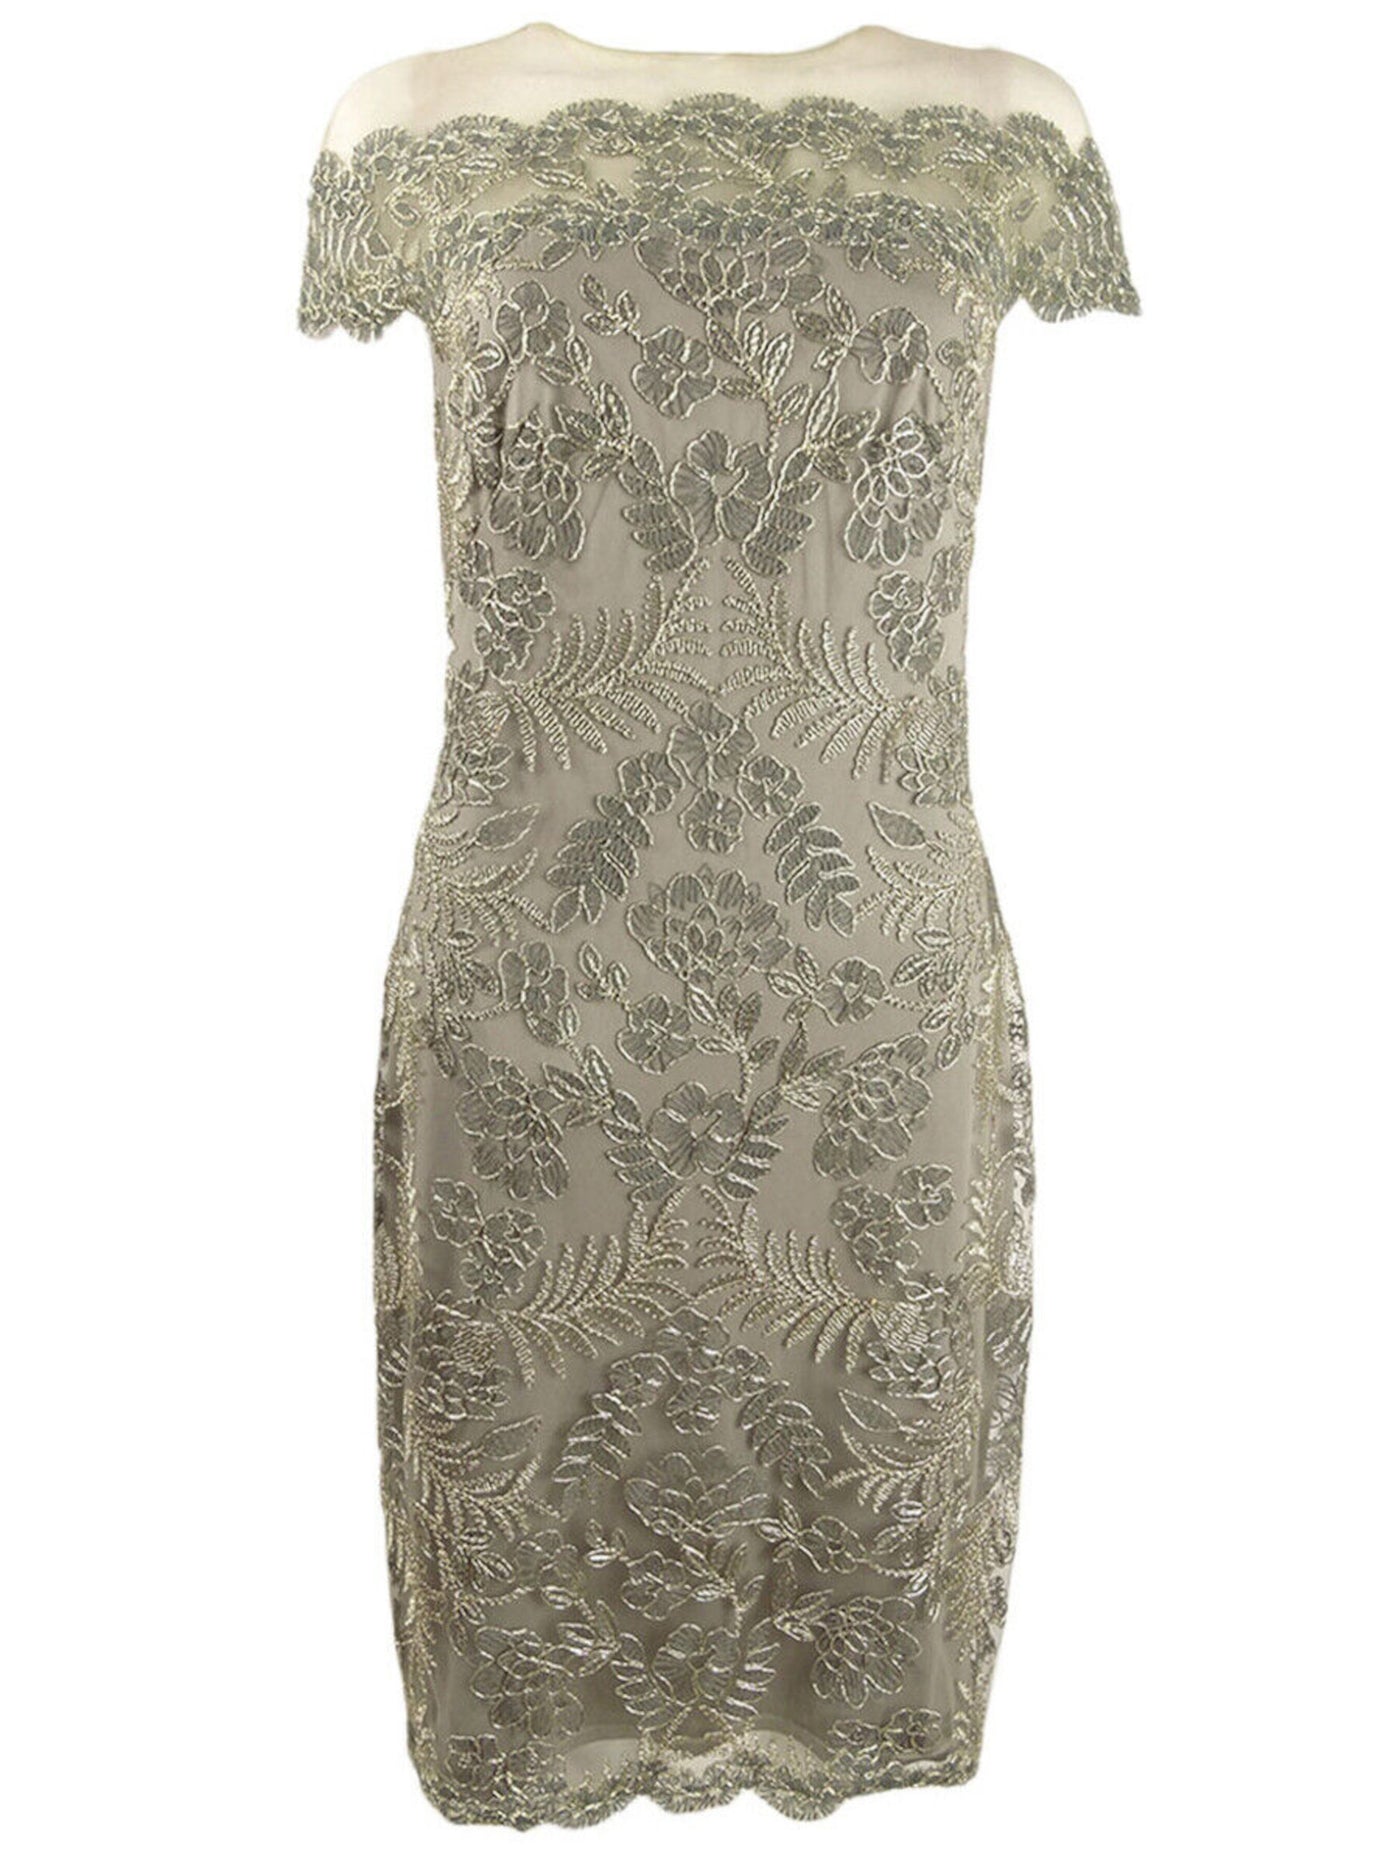 TADASHI SHOJI Womens Beige Embroidered Lace Sleeveless V Neck Above The Knee Cocktail Body Con Dress 12